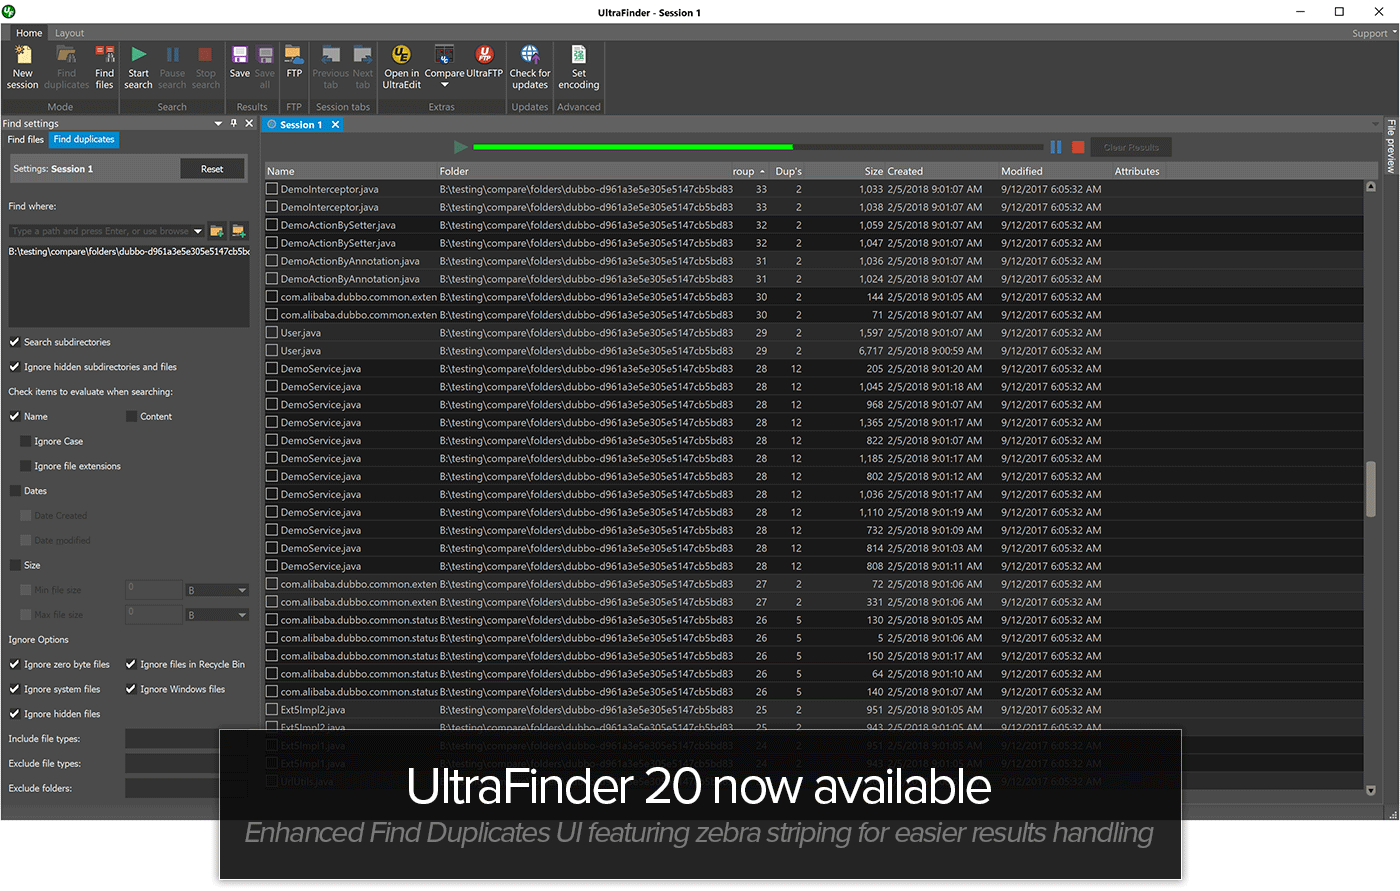 UltraFTP v21.00 now available